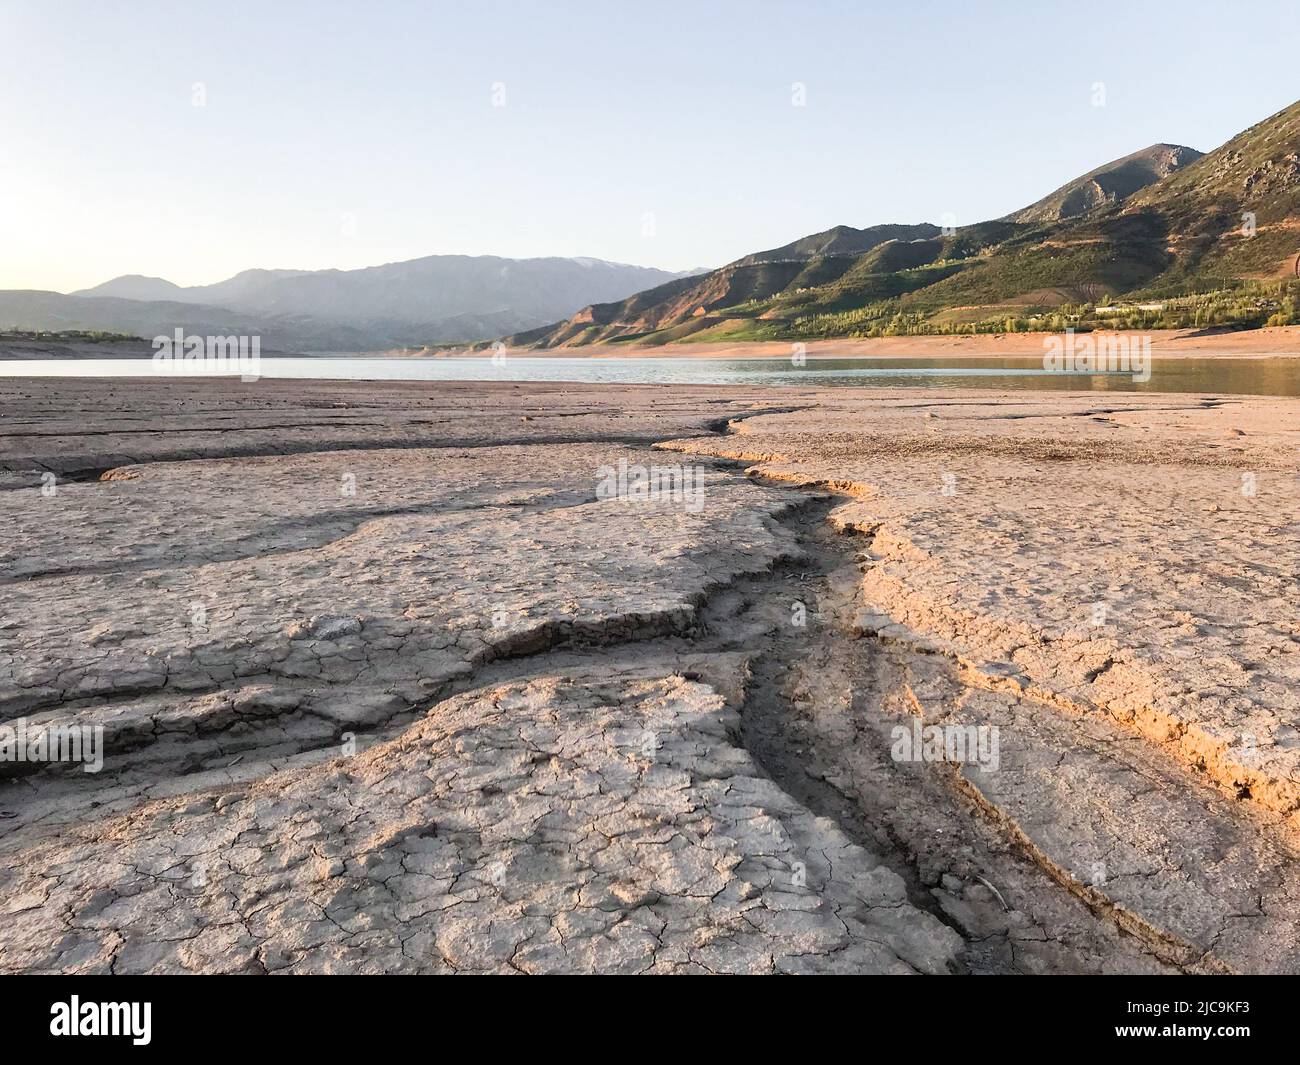 Beautiful landscape with setting sun: mountains, lake, cracked earth with stones -dried-up riverbend. Stock Photo